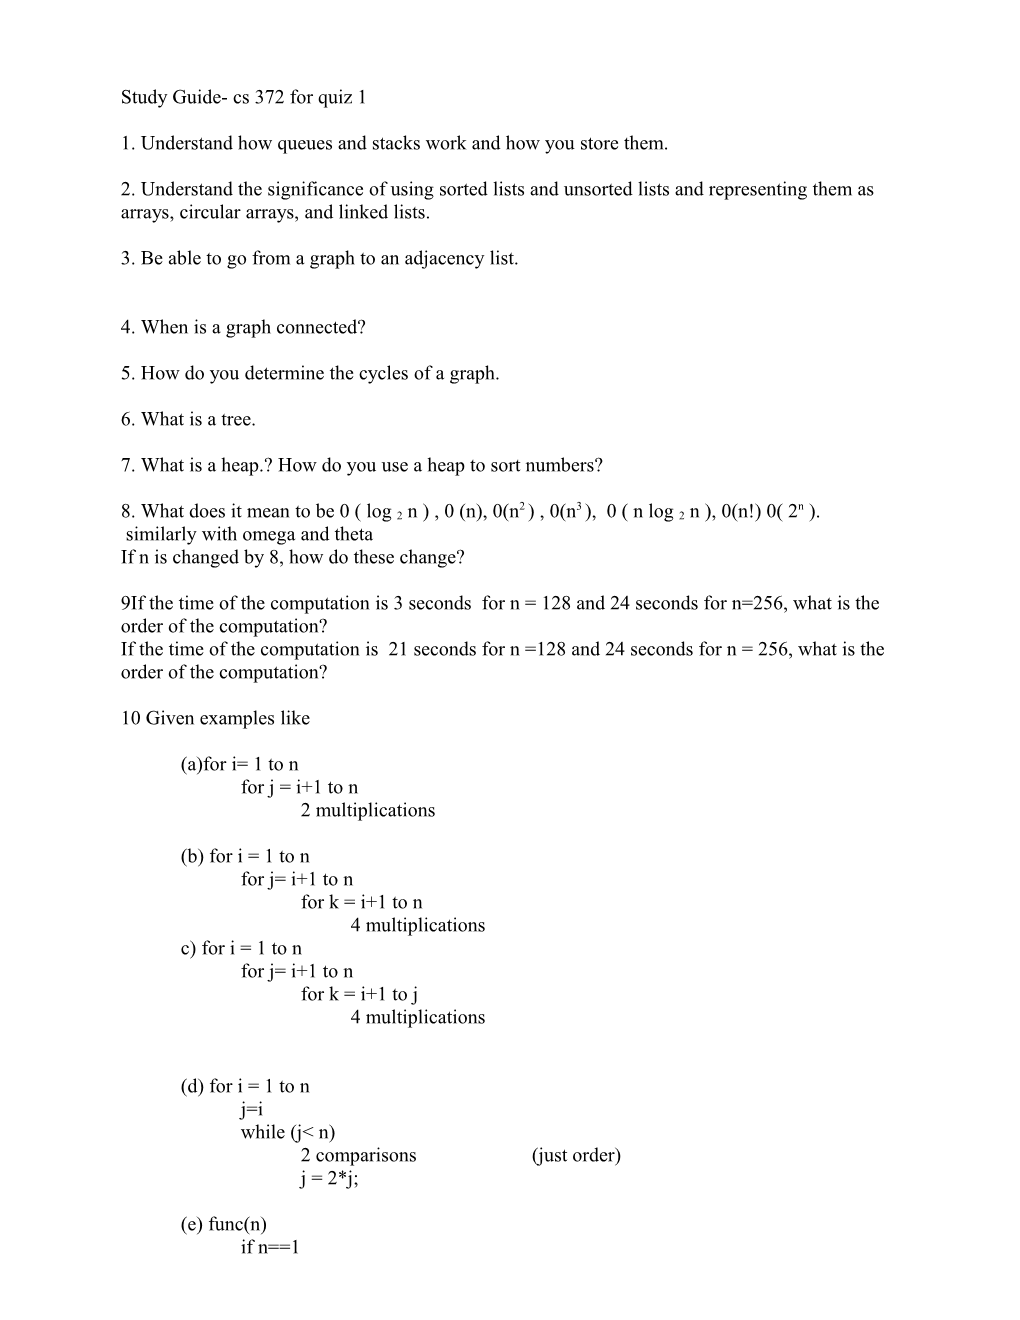 Study Guide- Cs 372 for Quiz 1